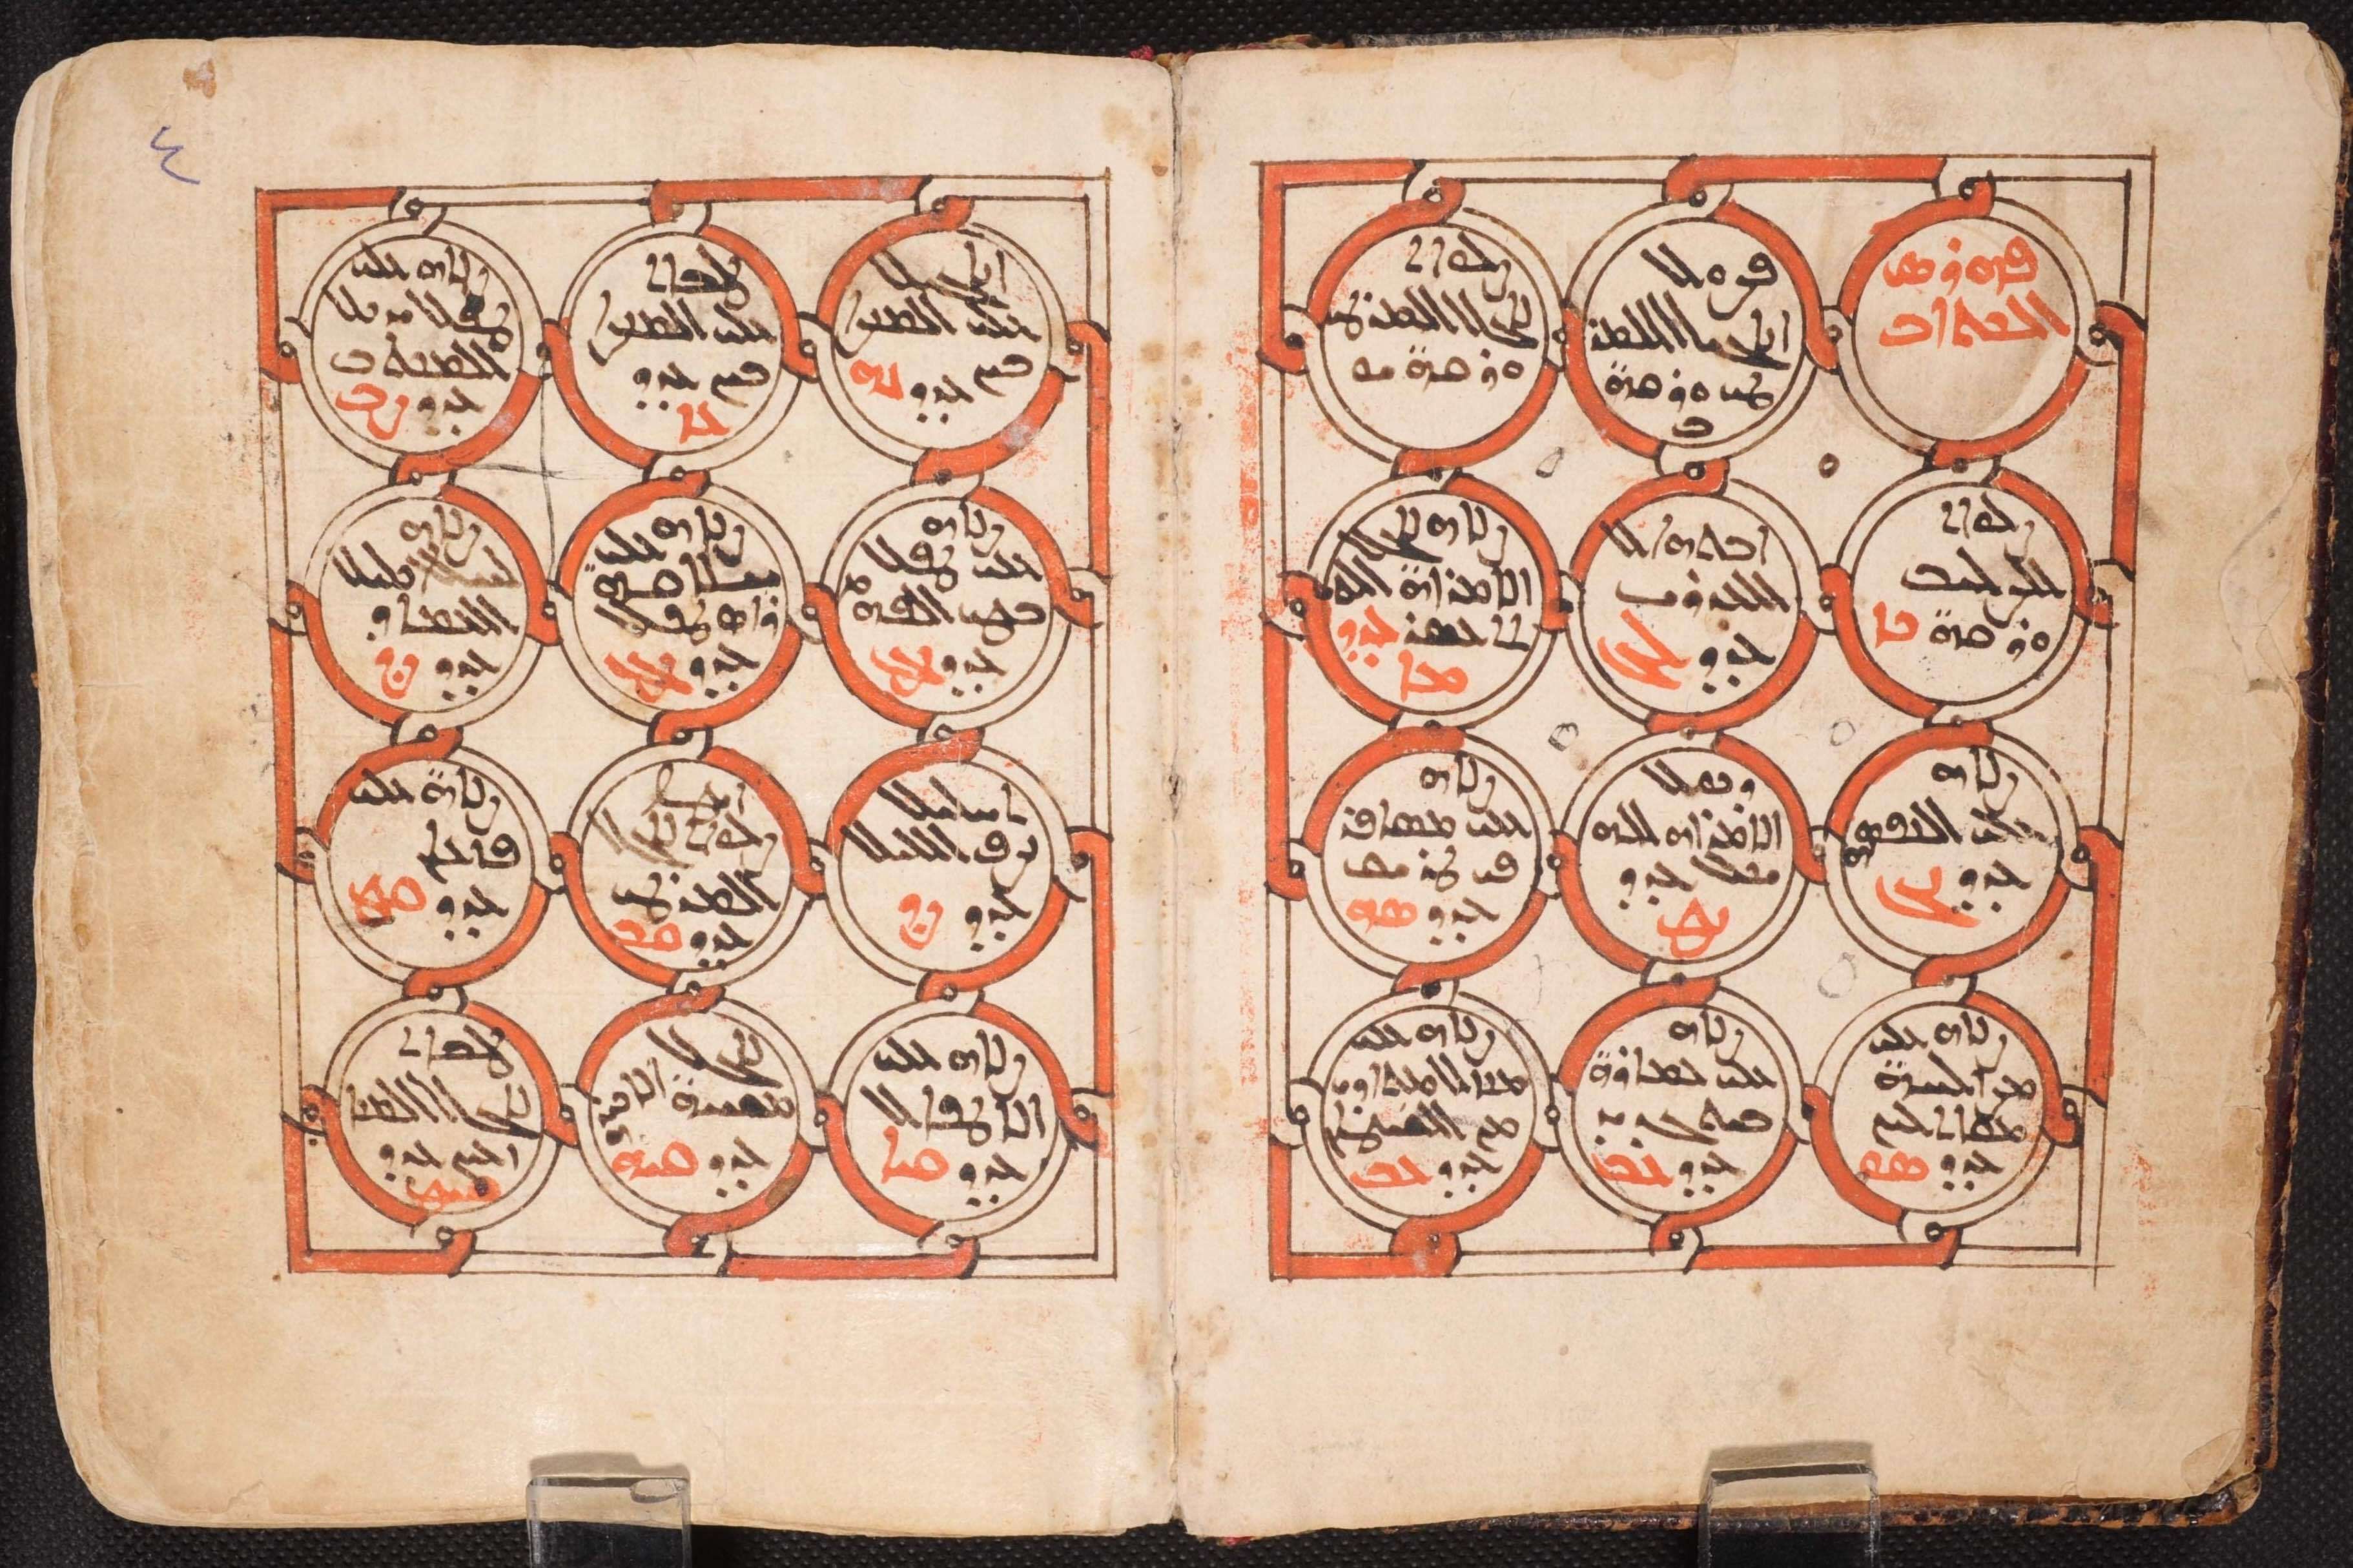 Table of contents from Ibrāhīm’s personal prayer book